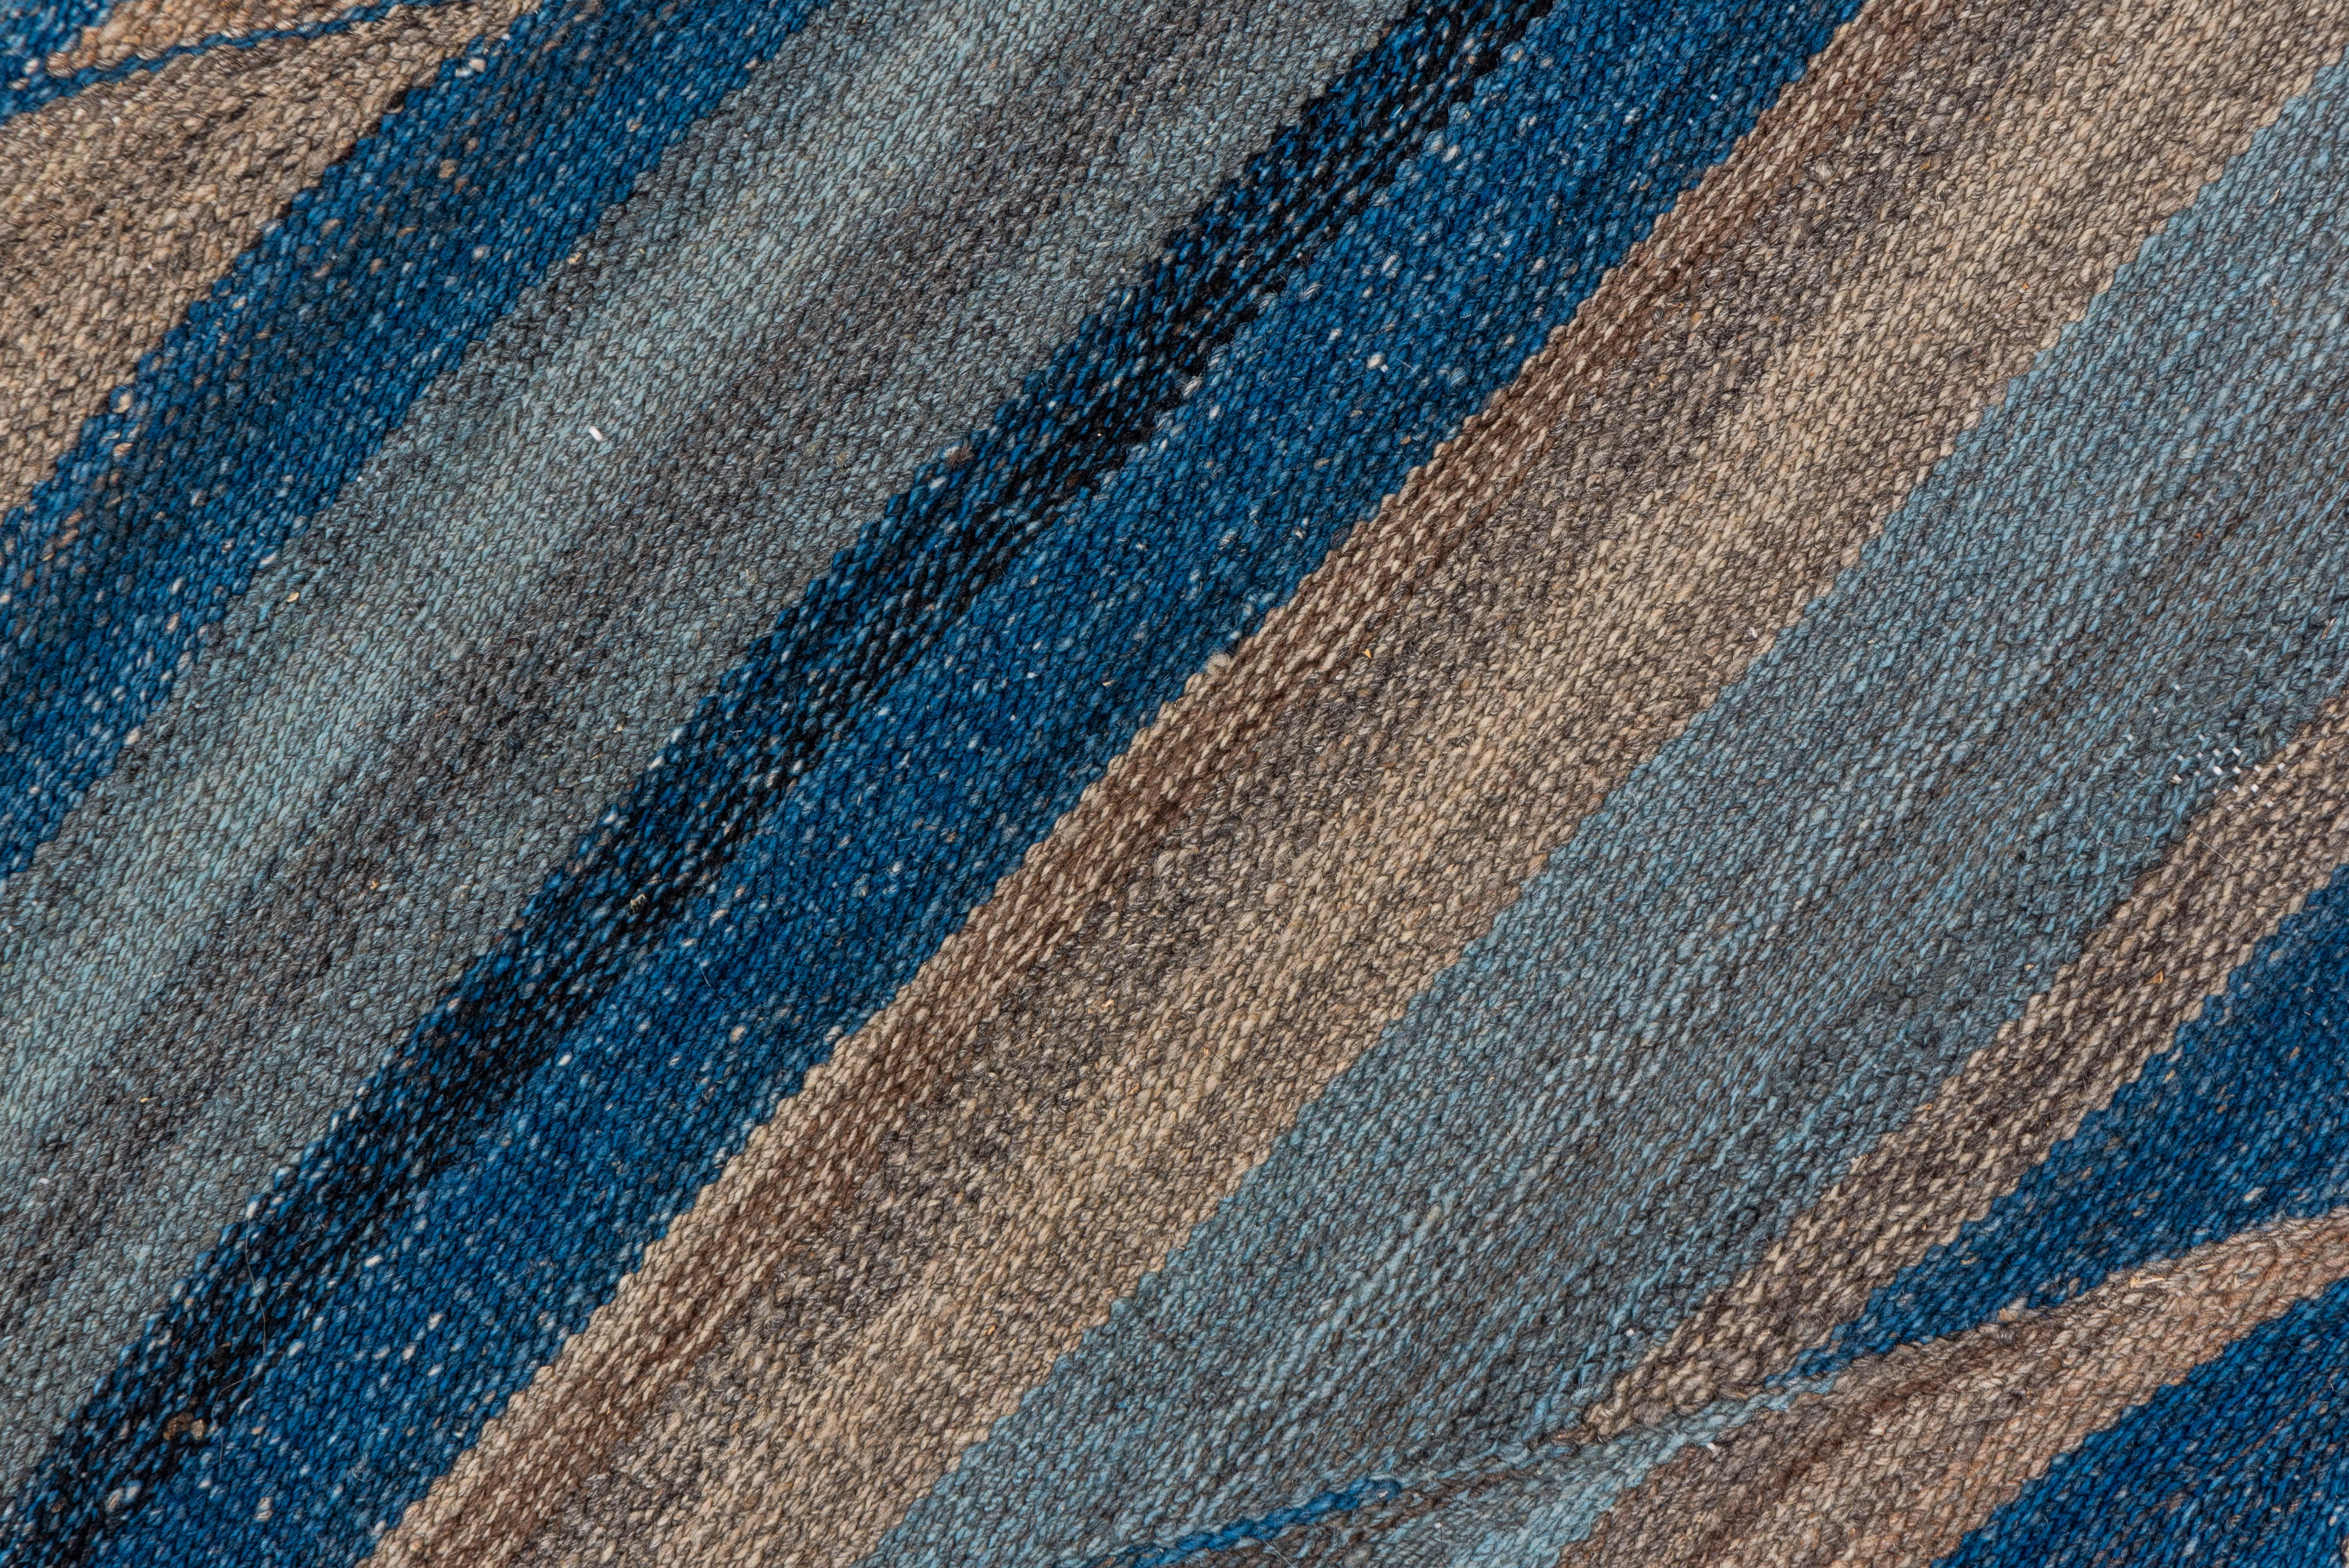 A modern flatweave with a wave-like pattern in tones of blue, light blue and brown. Woven in Afghanistan.